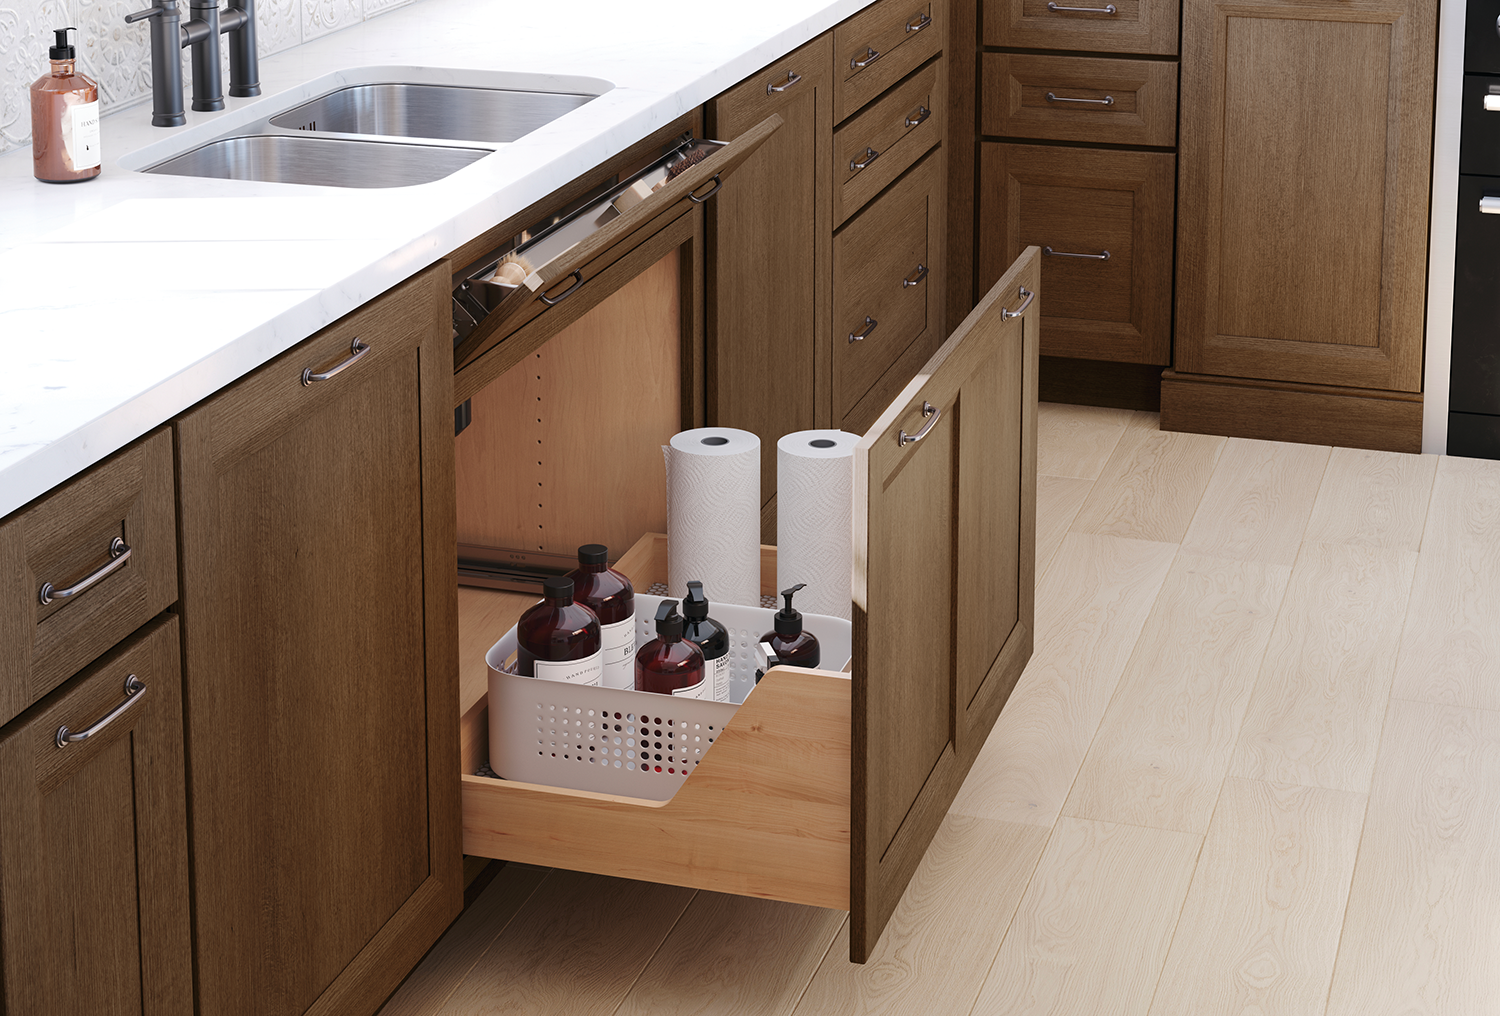 Sink base drawer: A brown drawer with silver handles, located beneath a sink. It provides storage space for cleaning supplies and other items.